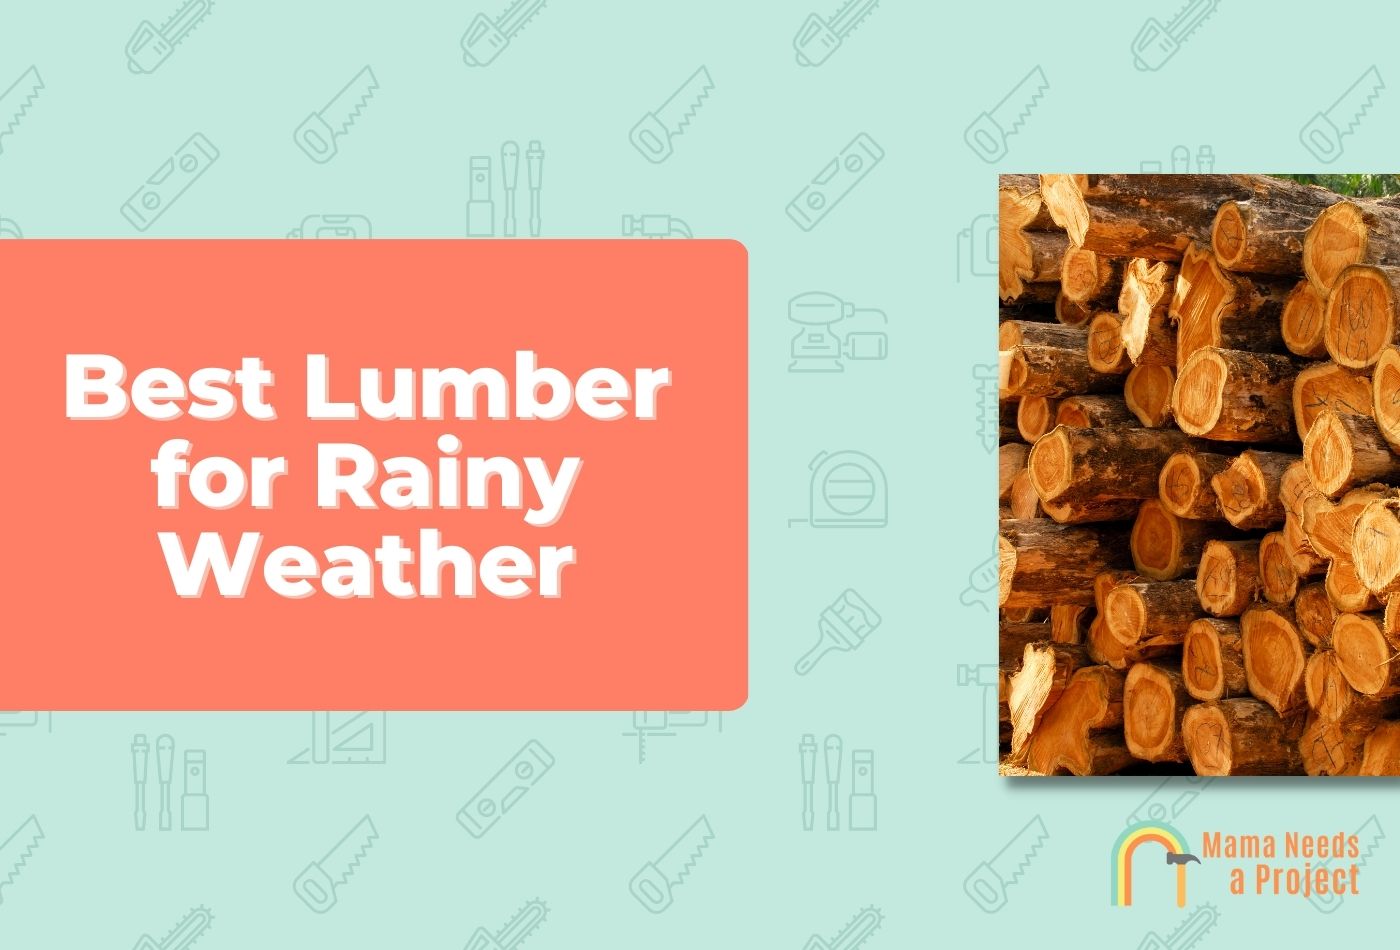 What Kind of Lumber is Good for Rainy Weather